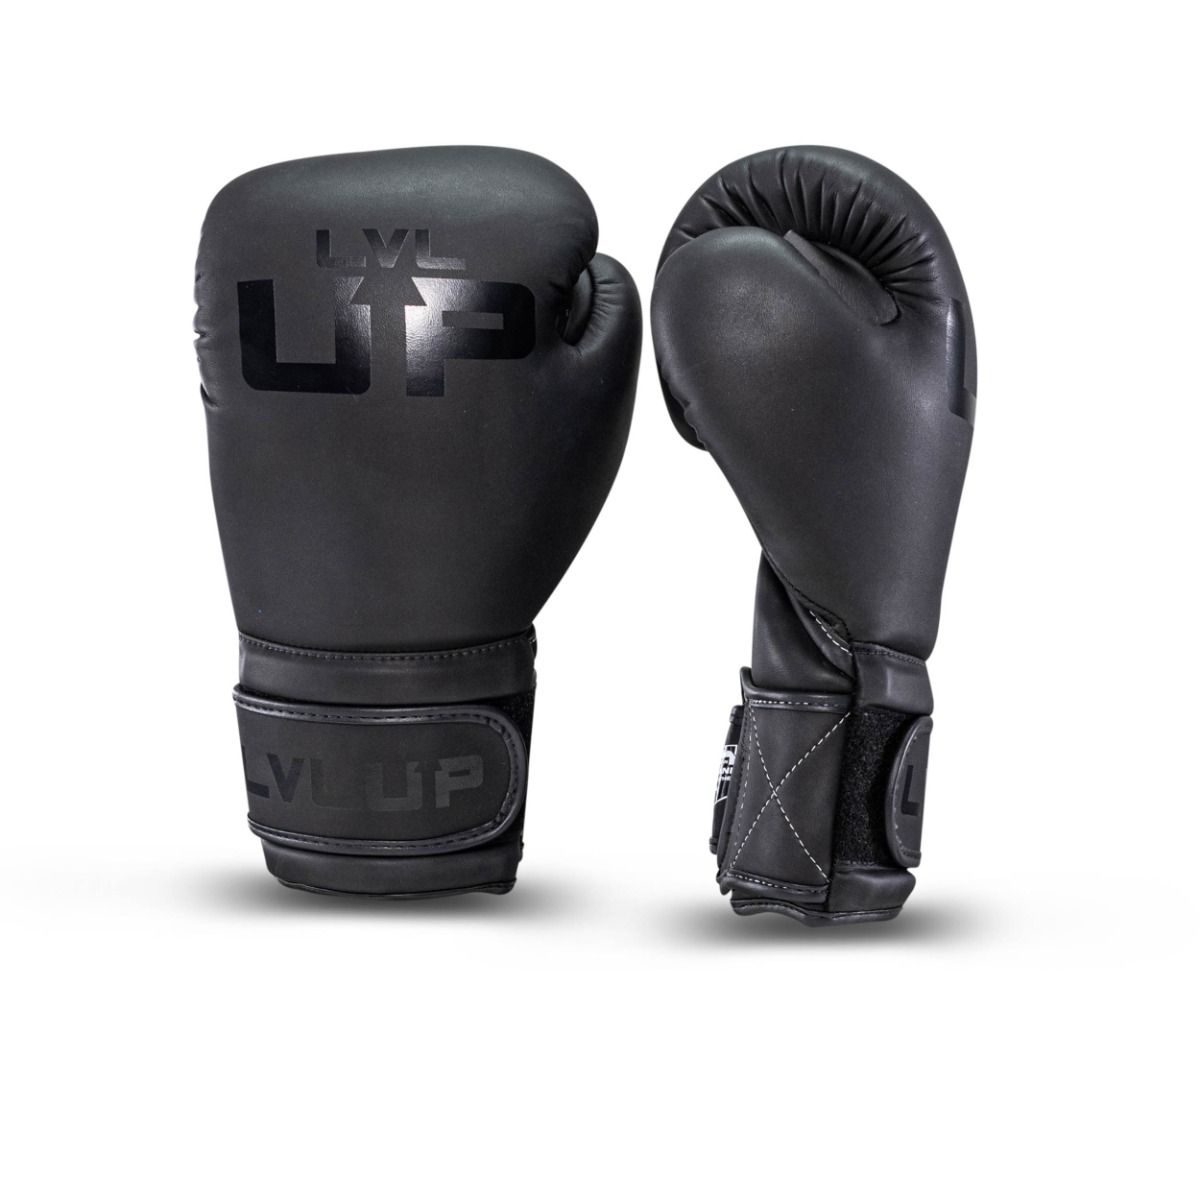 You’ll feel the Thai craftsmanship yourself when training with these ‘ all round ‘ boxing gloves .  The multi layered padding